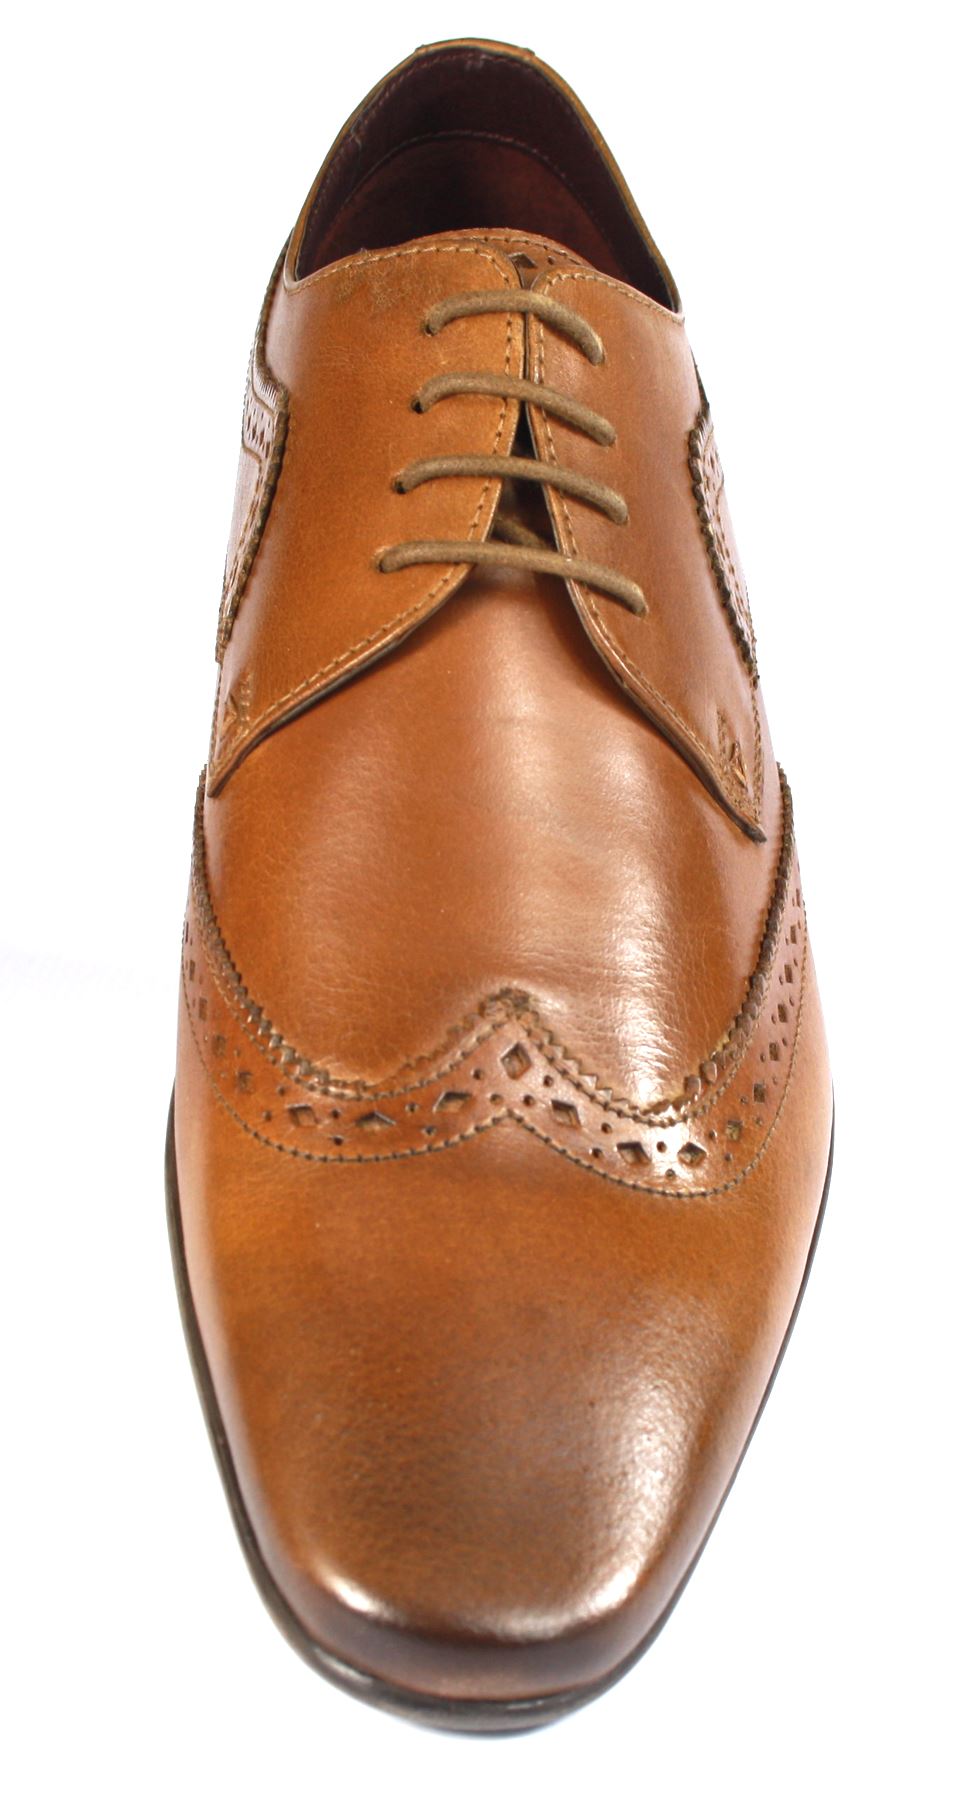 POD Ceres Men's Pointed Toe Leather Lace Up Brogues